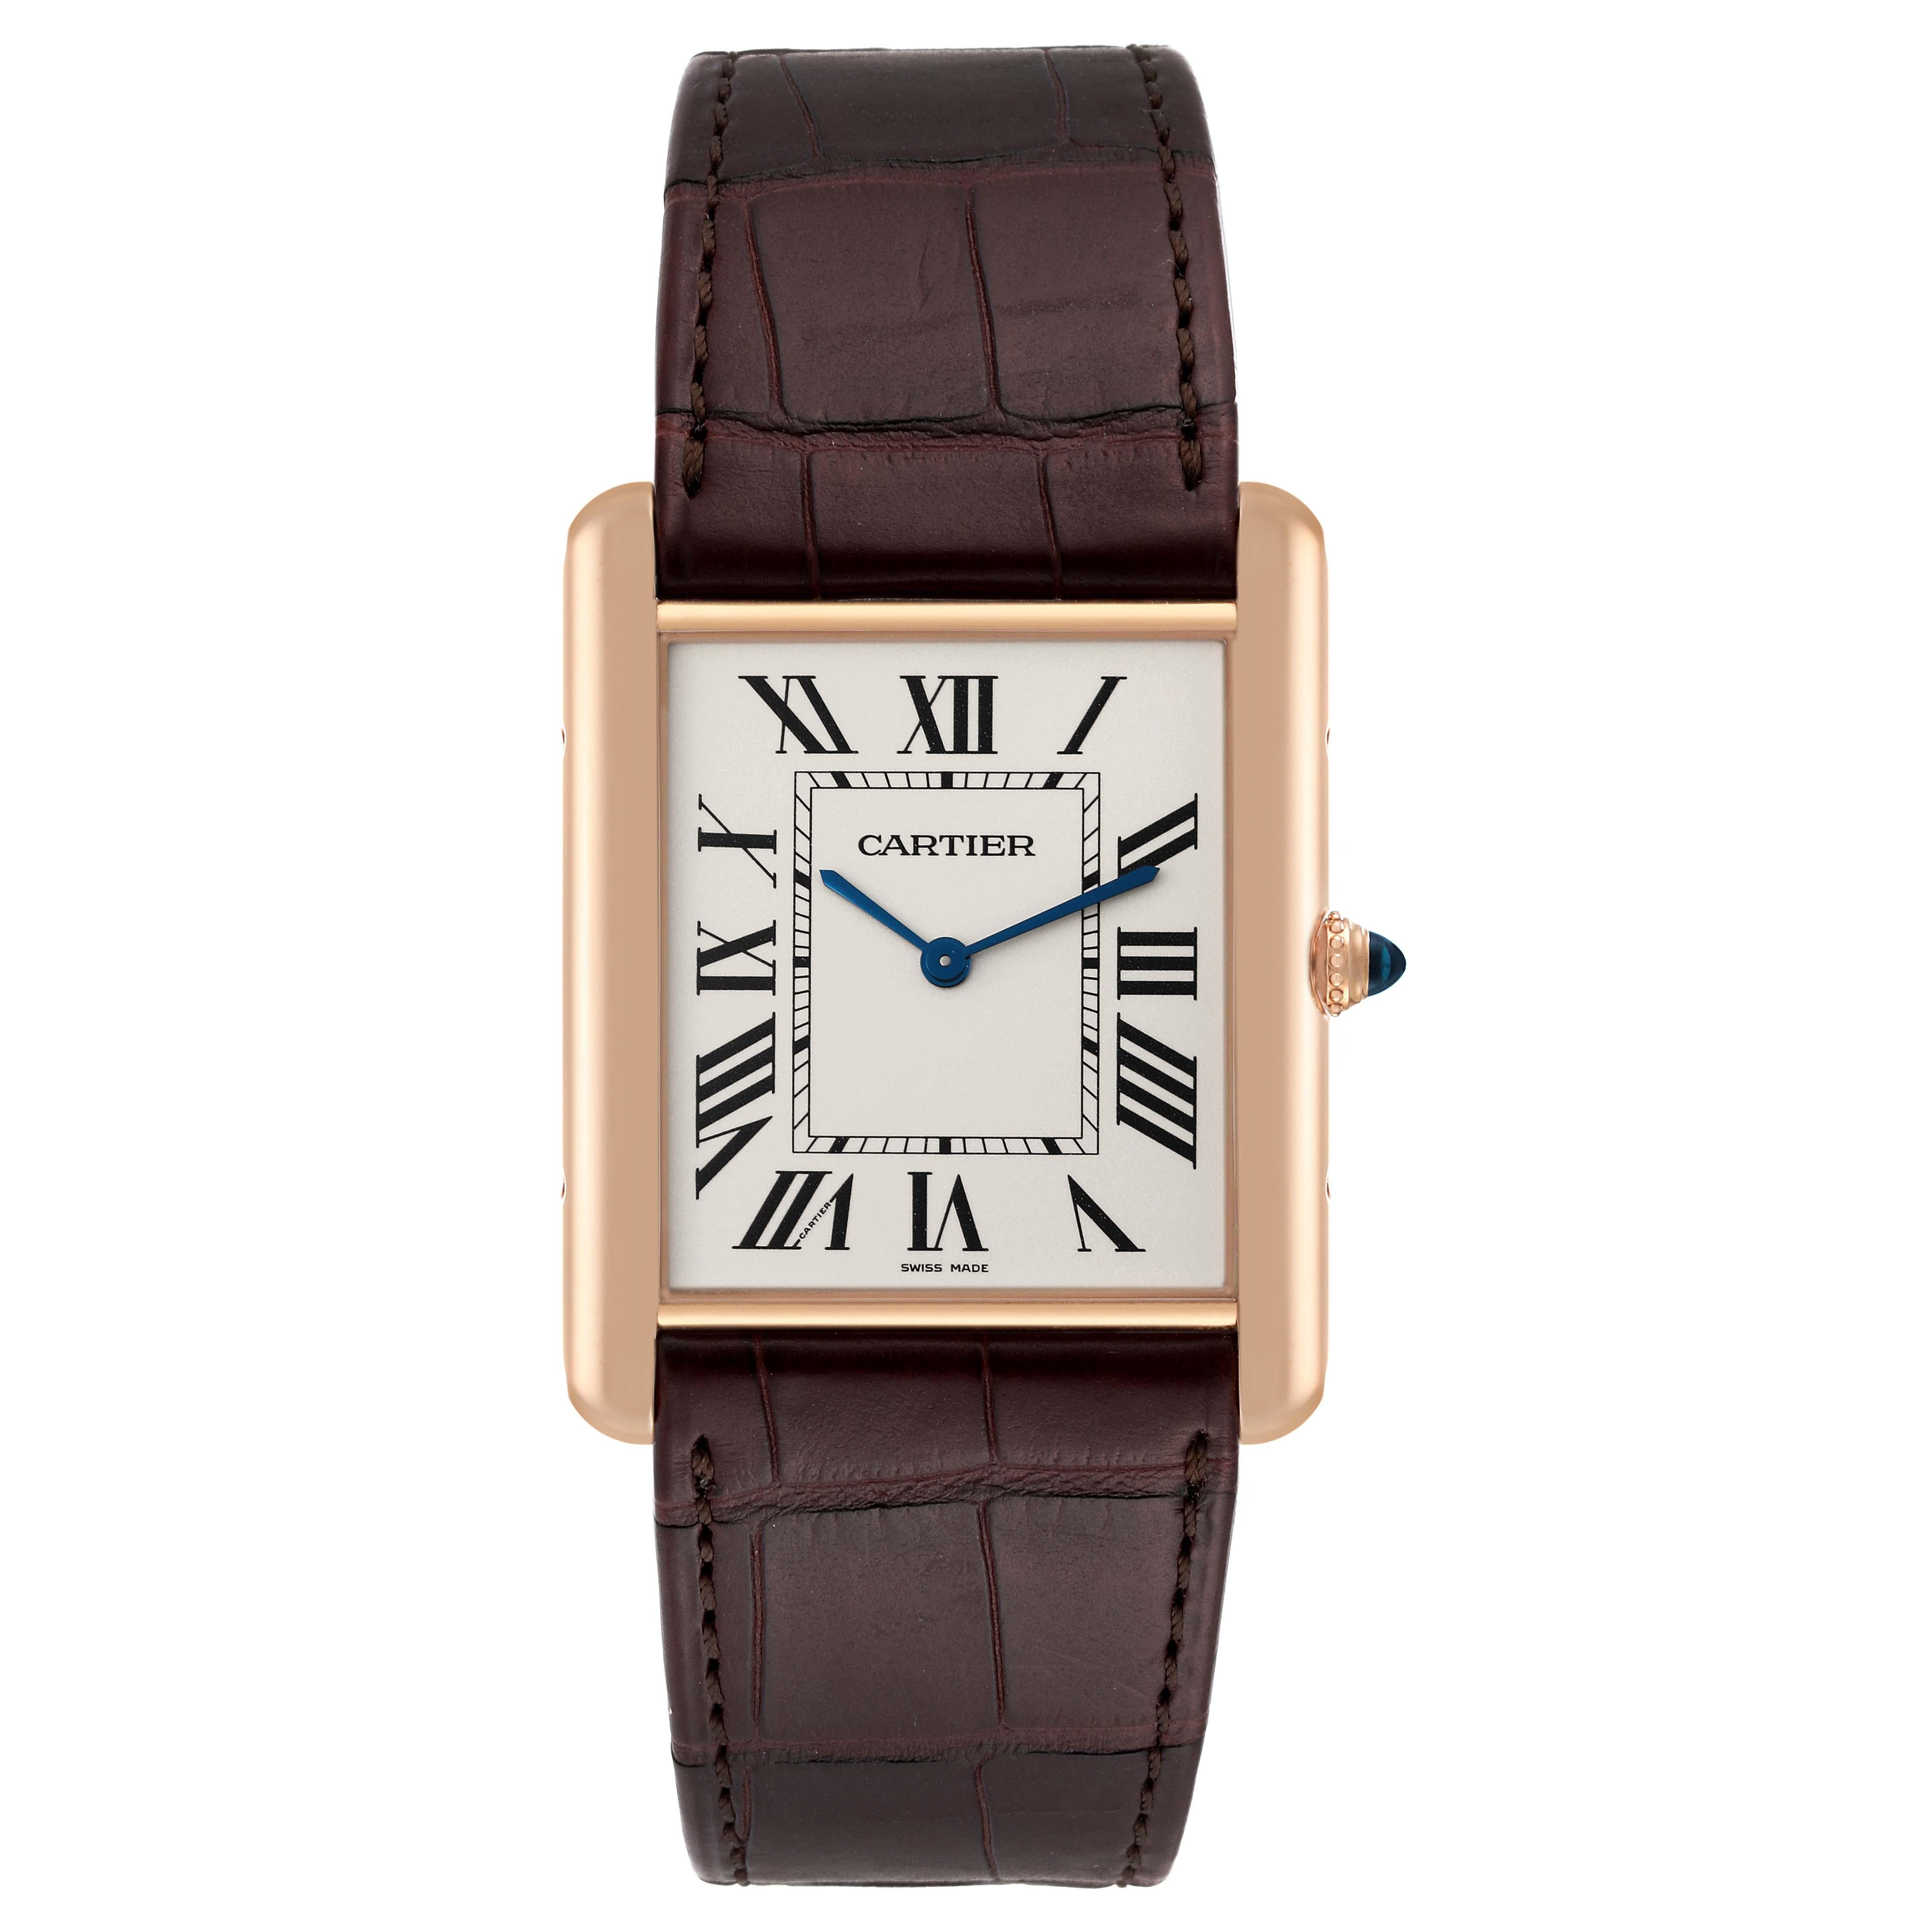 Cartier Tank Louis XL Rose Gold Manual Winding Mens Watch W1560017. Manual-winding movement. 18k rose gold case 40.4 mm x 34.92 mm. Case thickness: 5.1 mm. Circular grained crown set with the blue sapphire cabochon. . Mineral crystal. Silvered